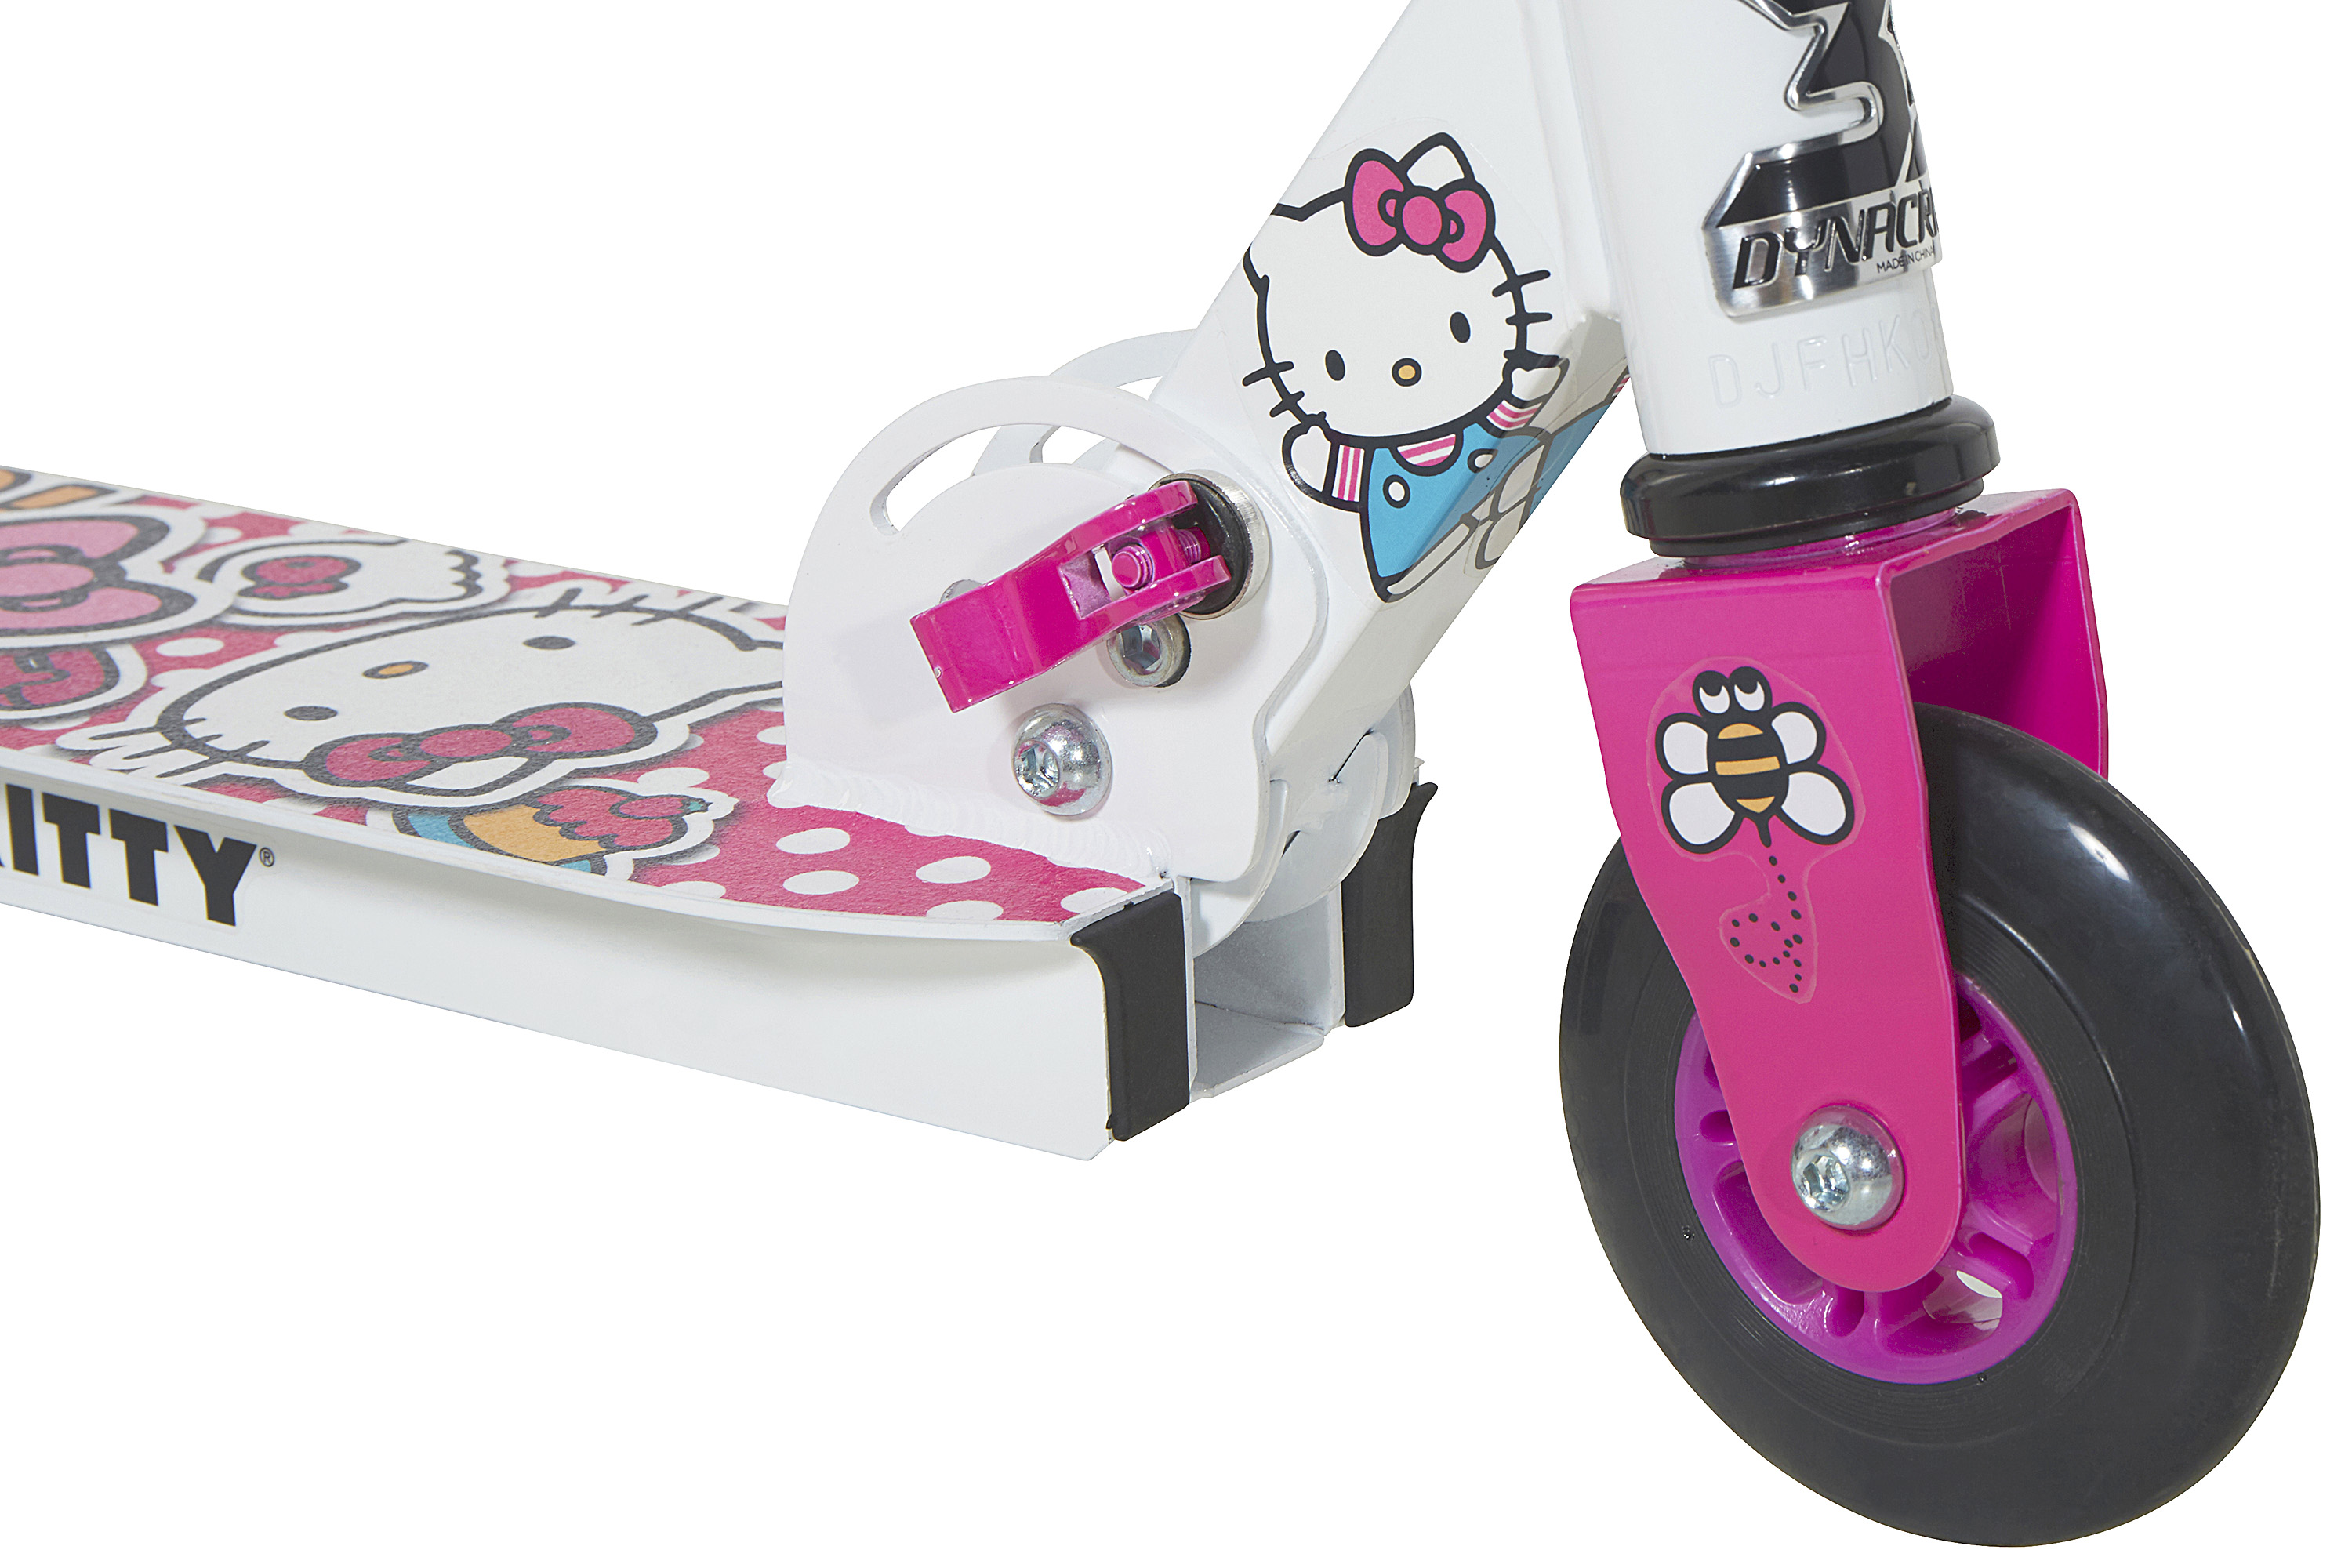 4" Girls' 2 Wheel Hello Kitty Folding Scooter by Dynacraft - image 3 of 5